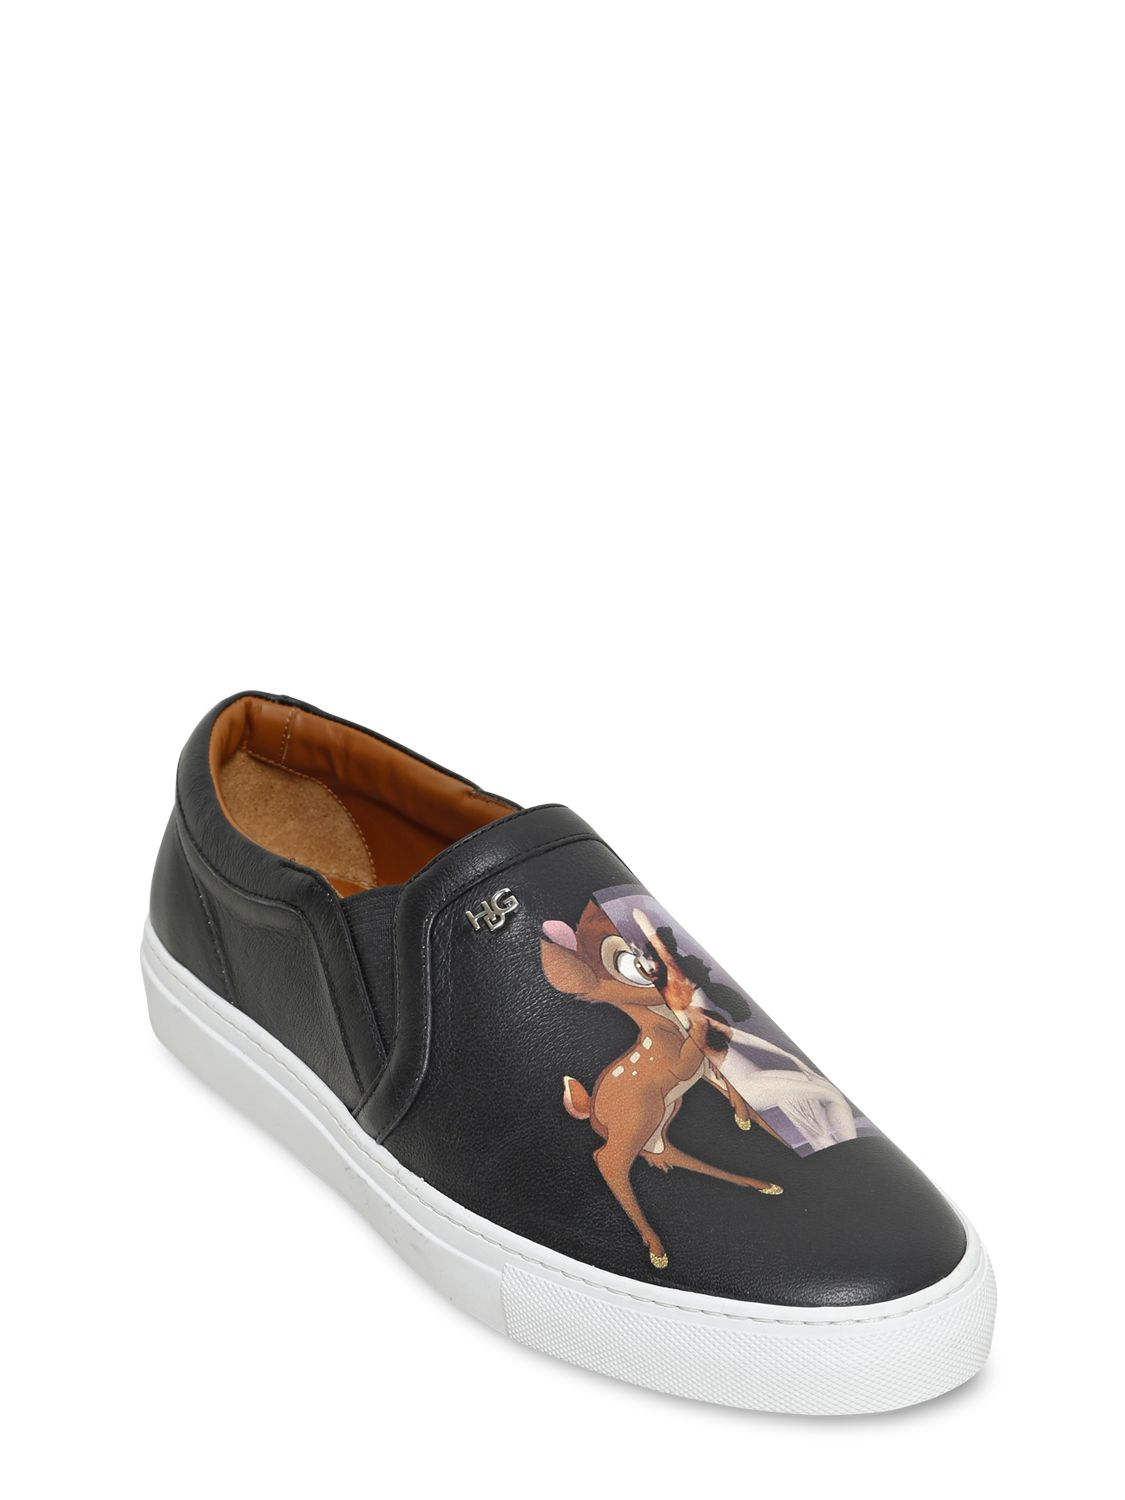 Givenchy Bambi Female Form Leather Sneakers in Black for Men - Lyst